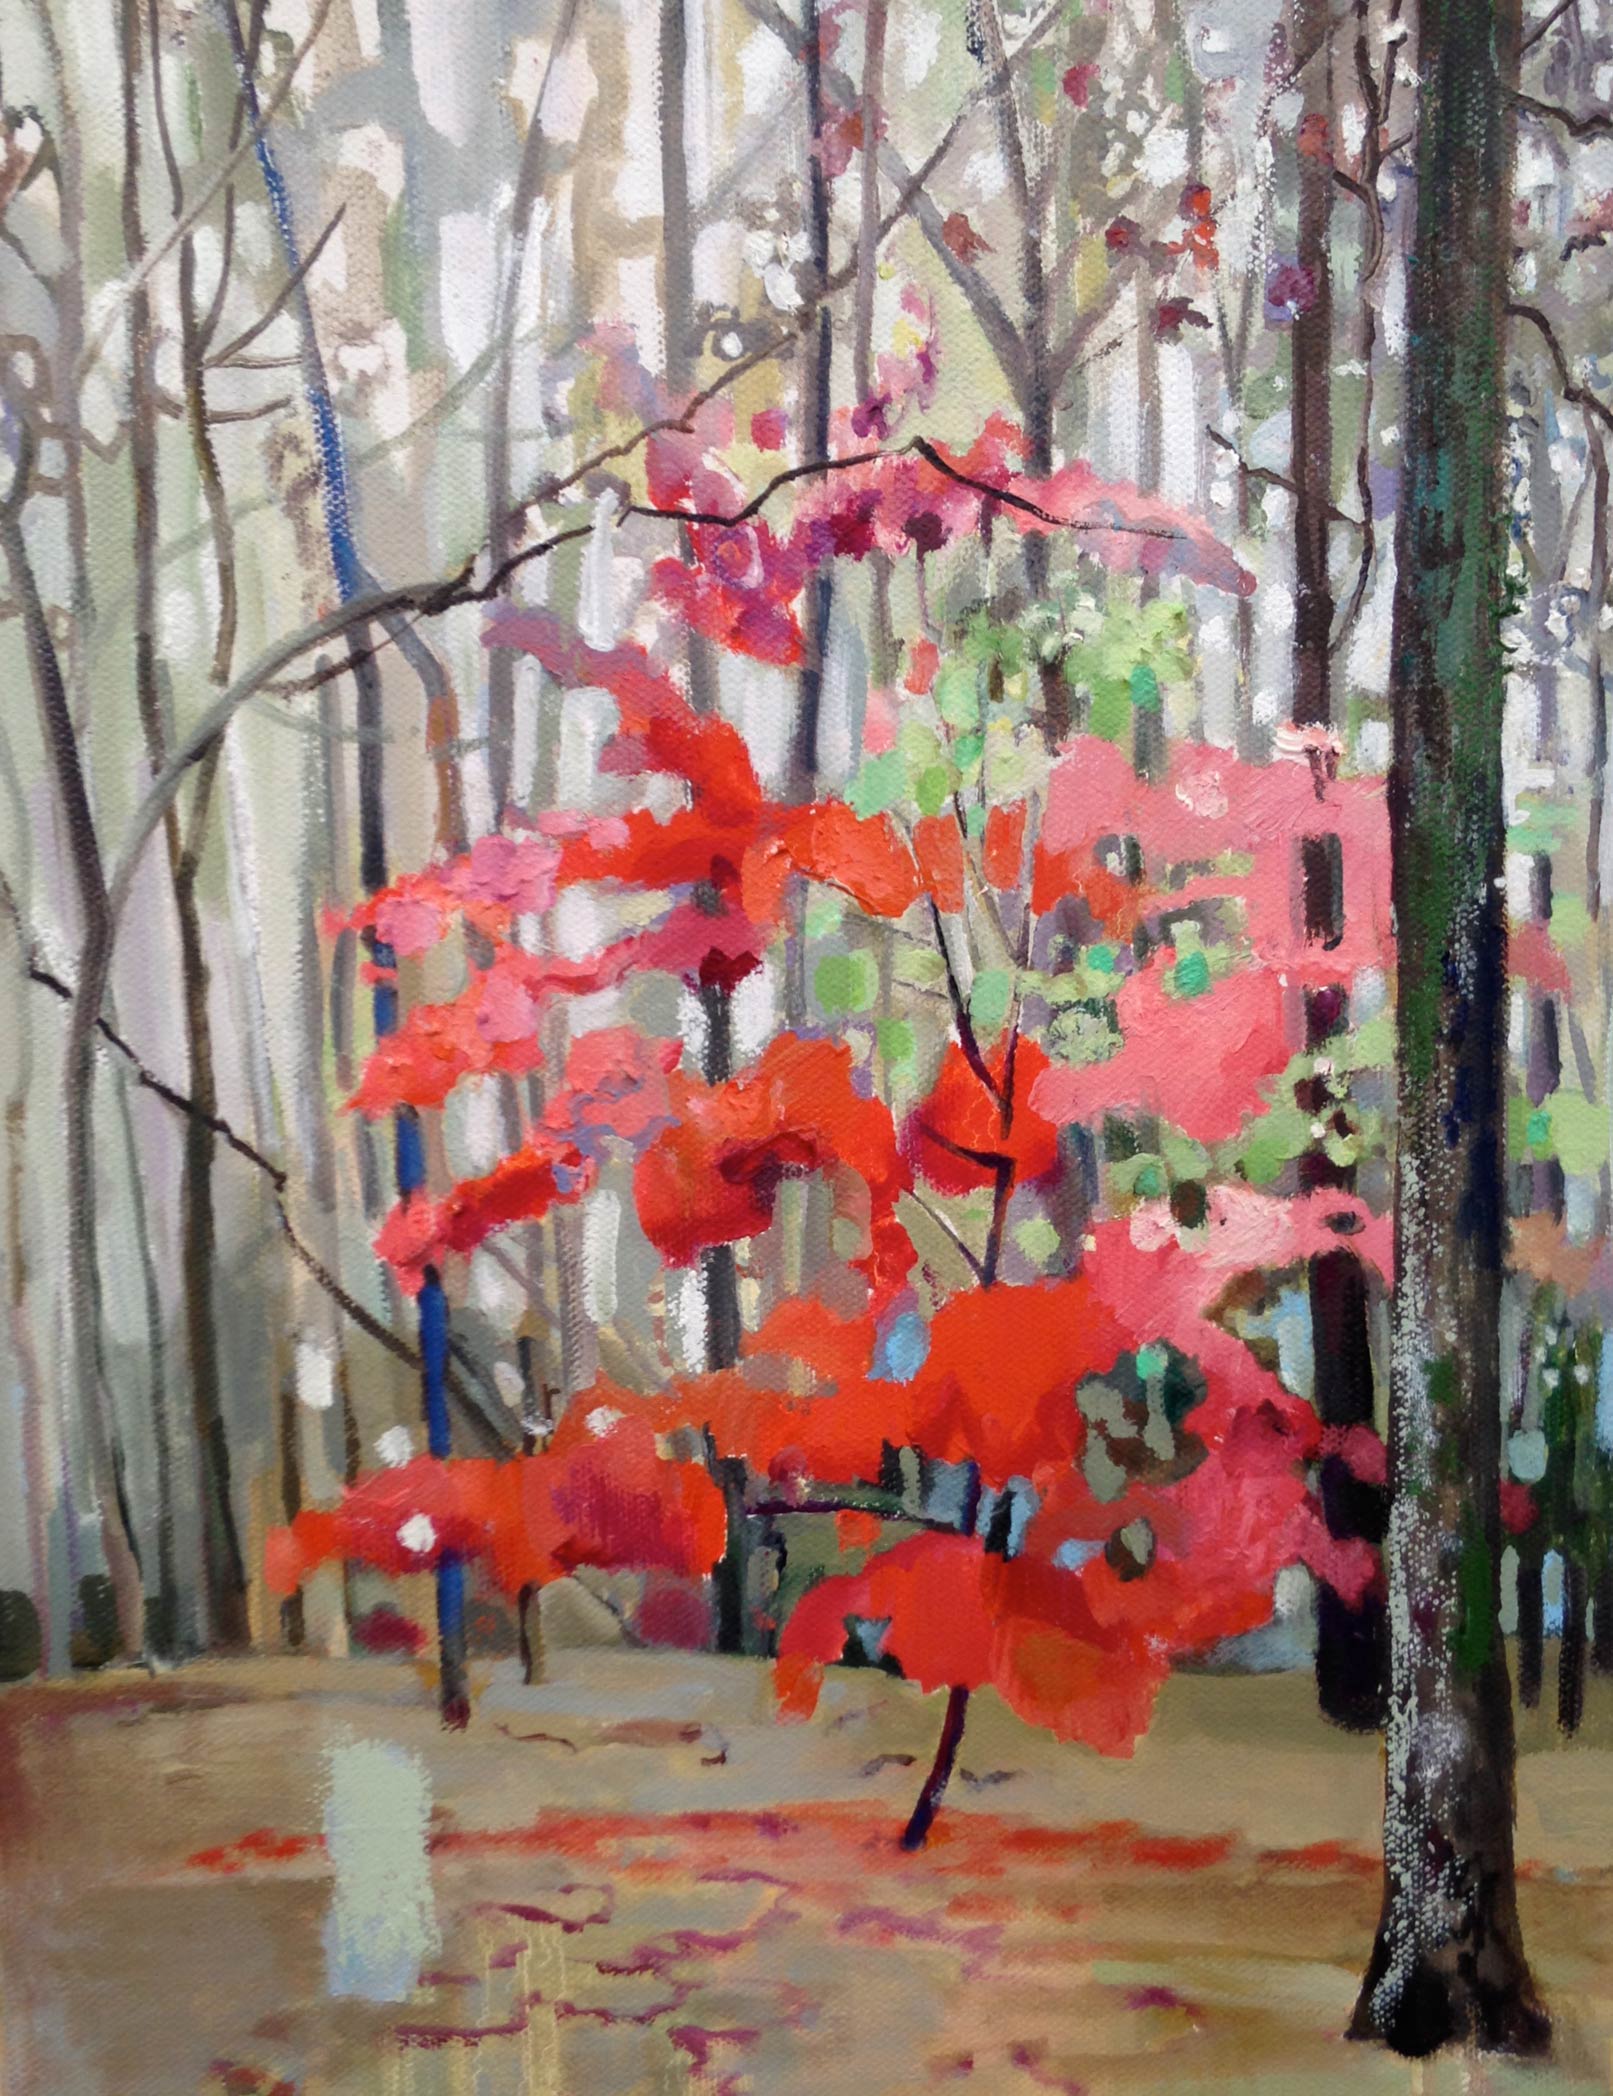    ‏Red Maple, Rainy Day &nbsp;  ‏oil and oil stick  14 x 11 inches, 2016 